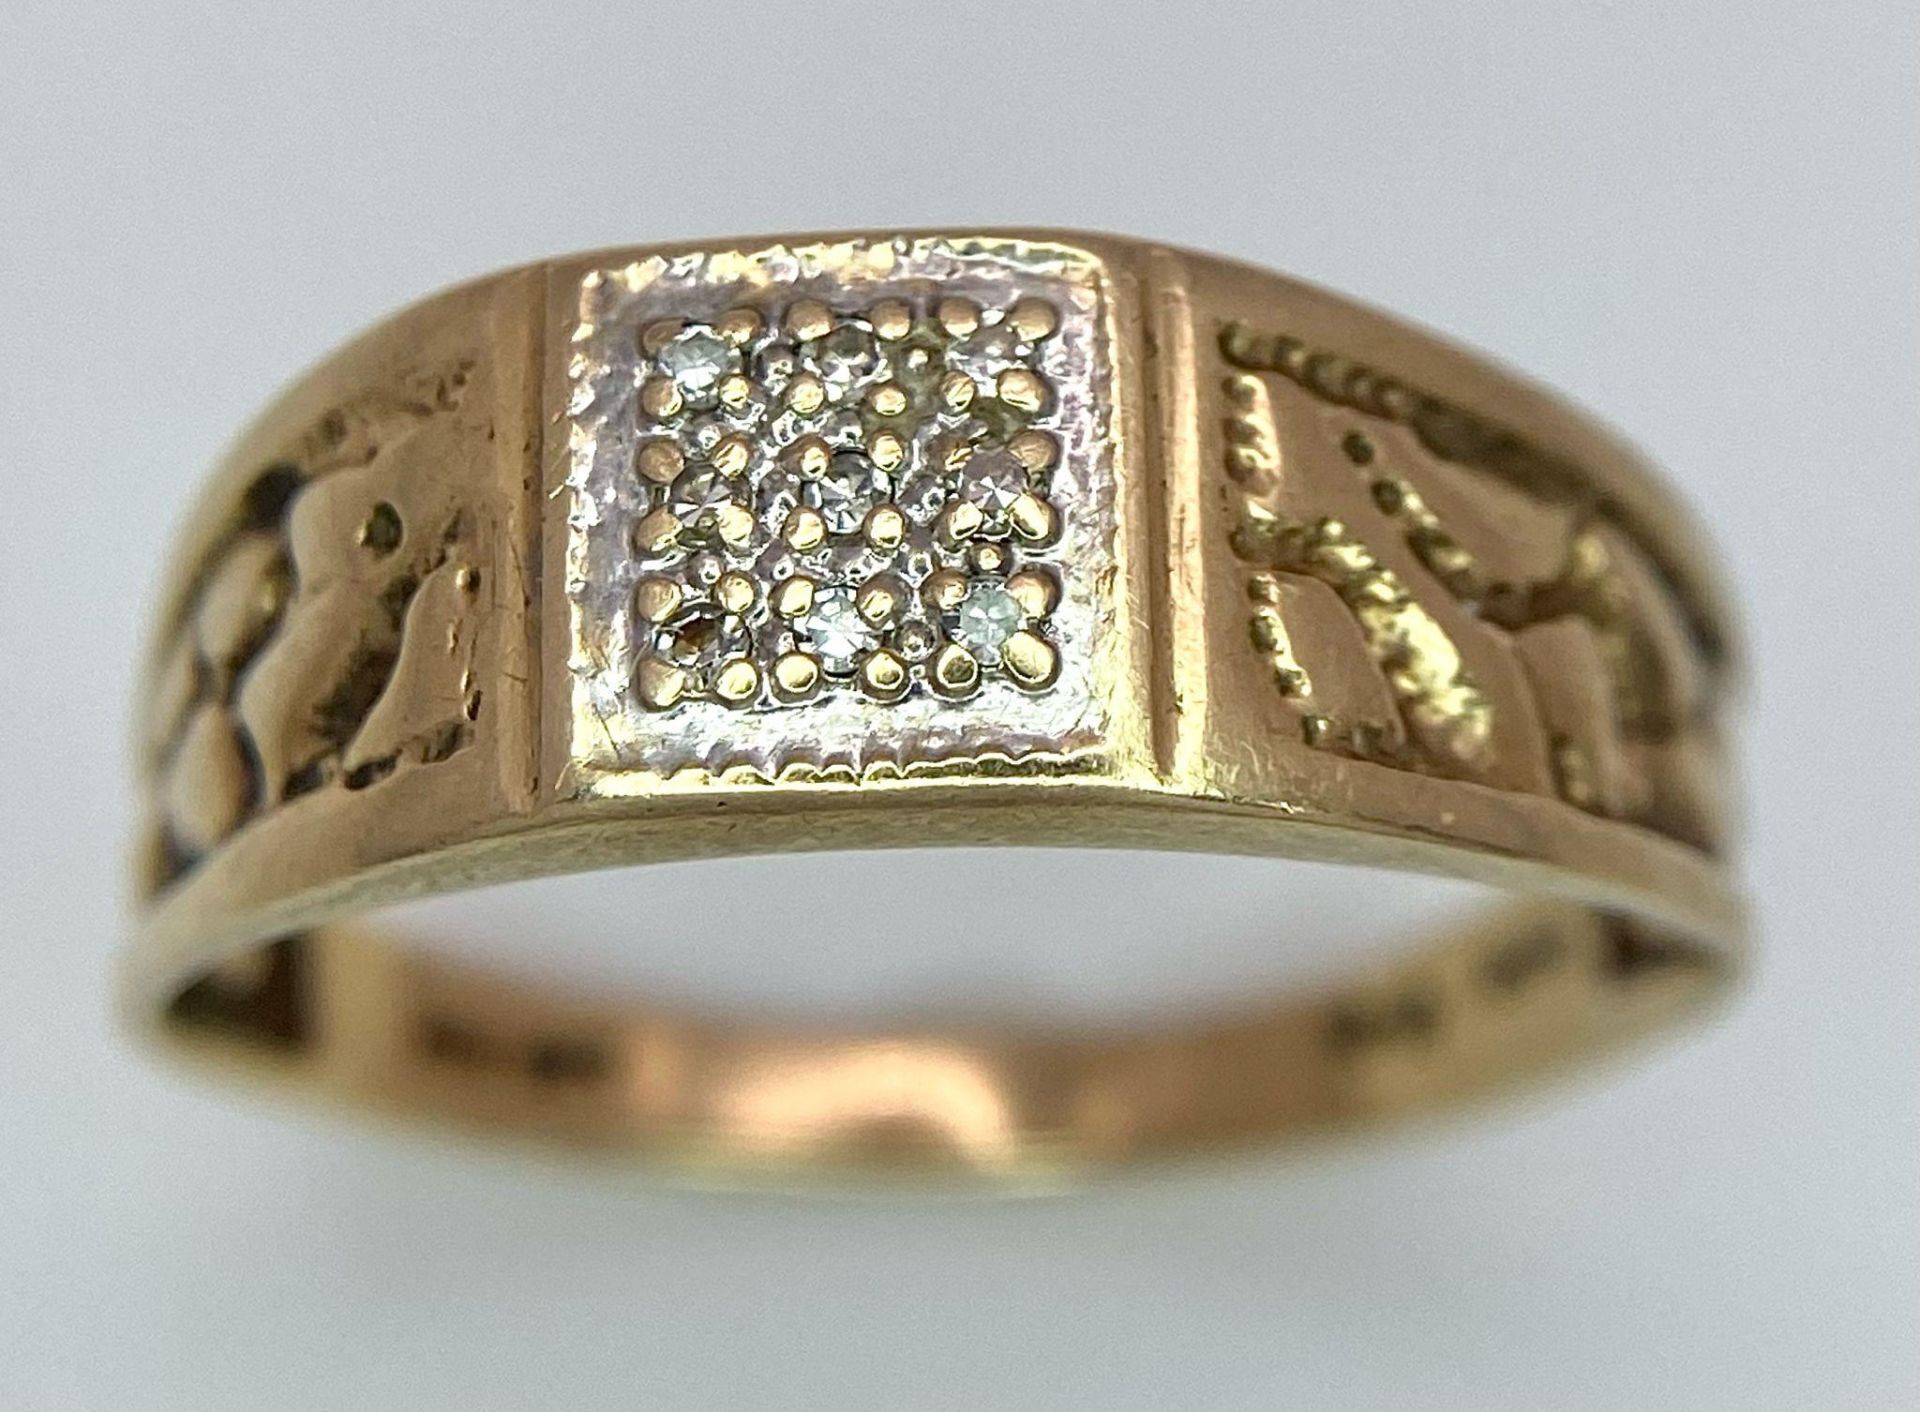 A VINTAGE GENTS 9K YELLOW GOLD DIAMOND BAND RING WITH PATTERNED SHOULDERS - 0.01CT DIAMOND - 2G - Image 3 of 6